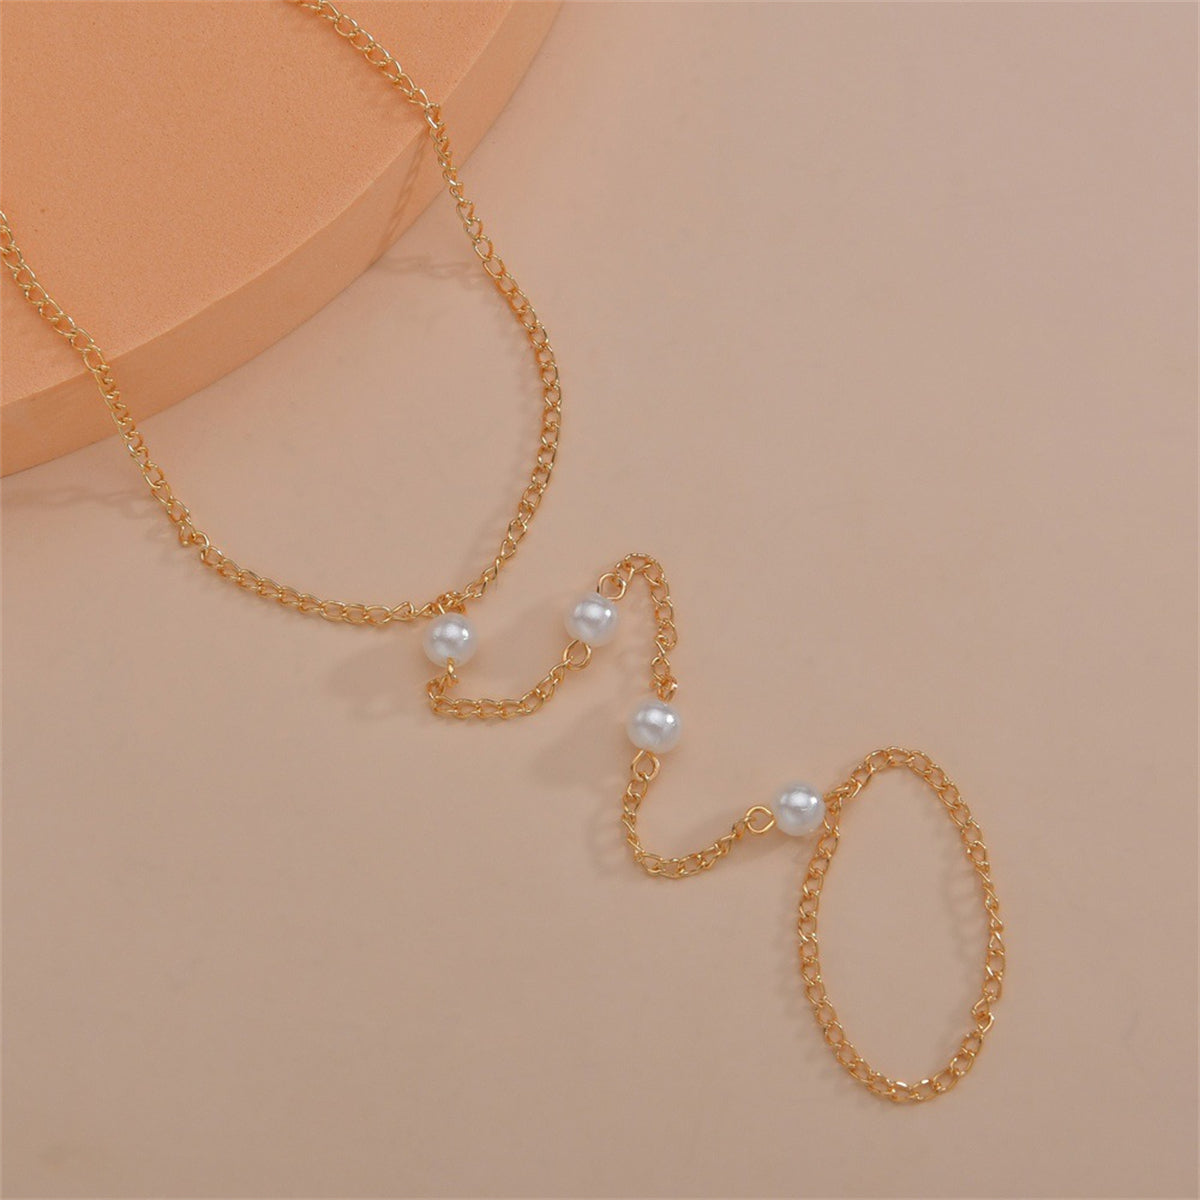 Pearl & 18K Gold-Plated Toe-Ring Anklet